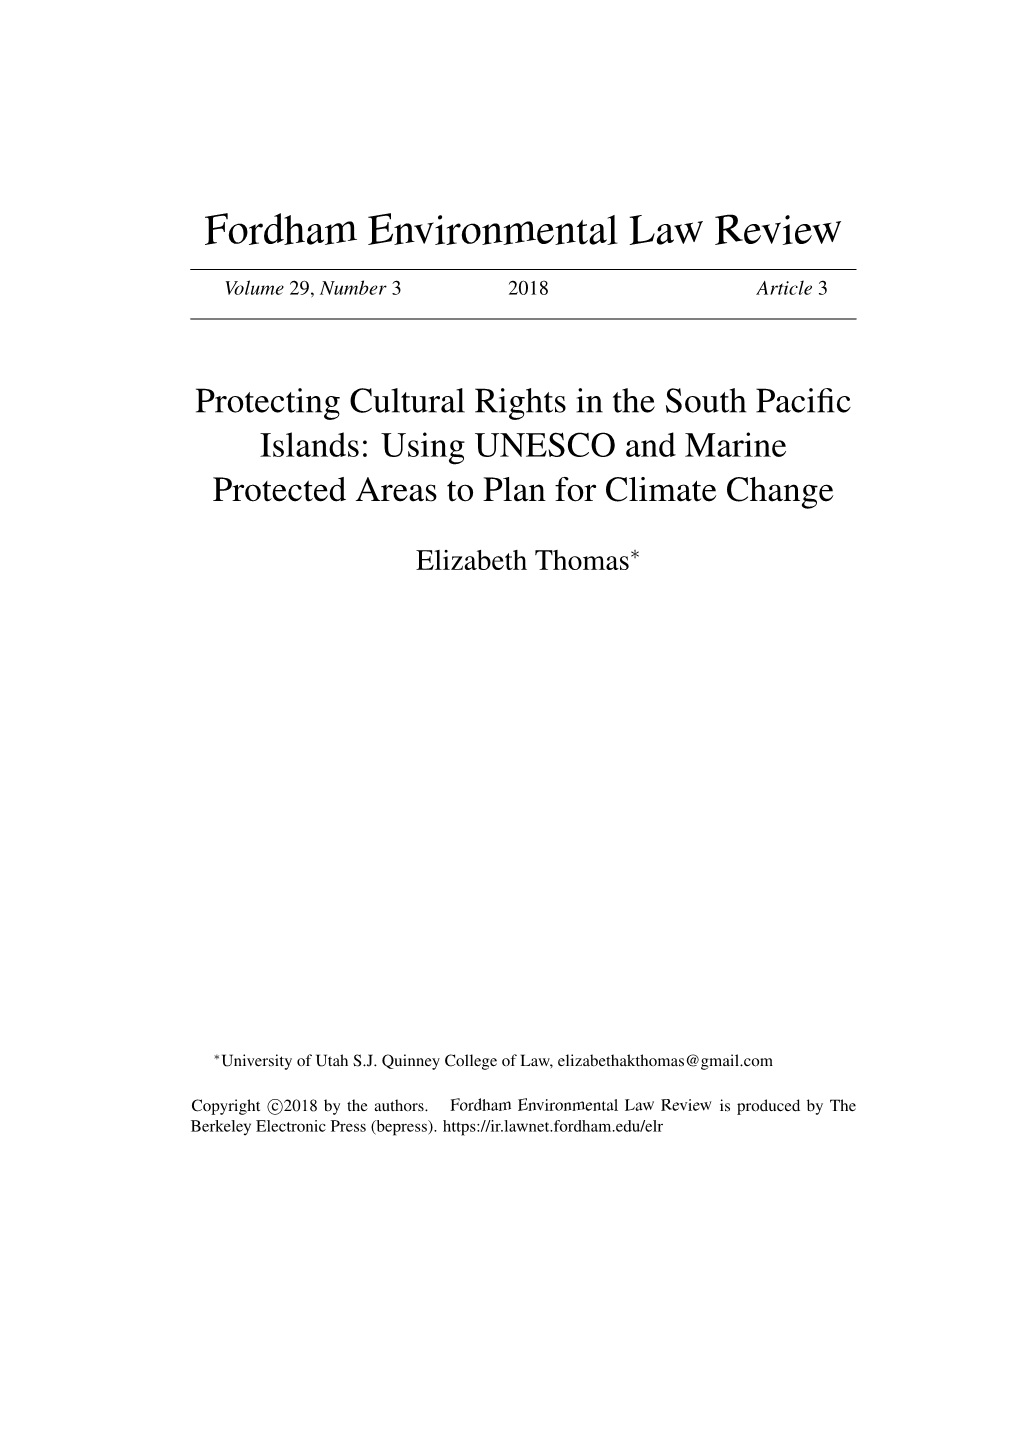 Protecting Cultural Rights in the South Pacific Islands: Using Unesco and Marine Protected Areas to Plan for Climate Change